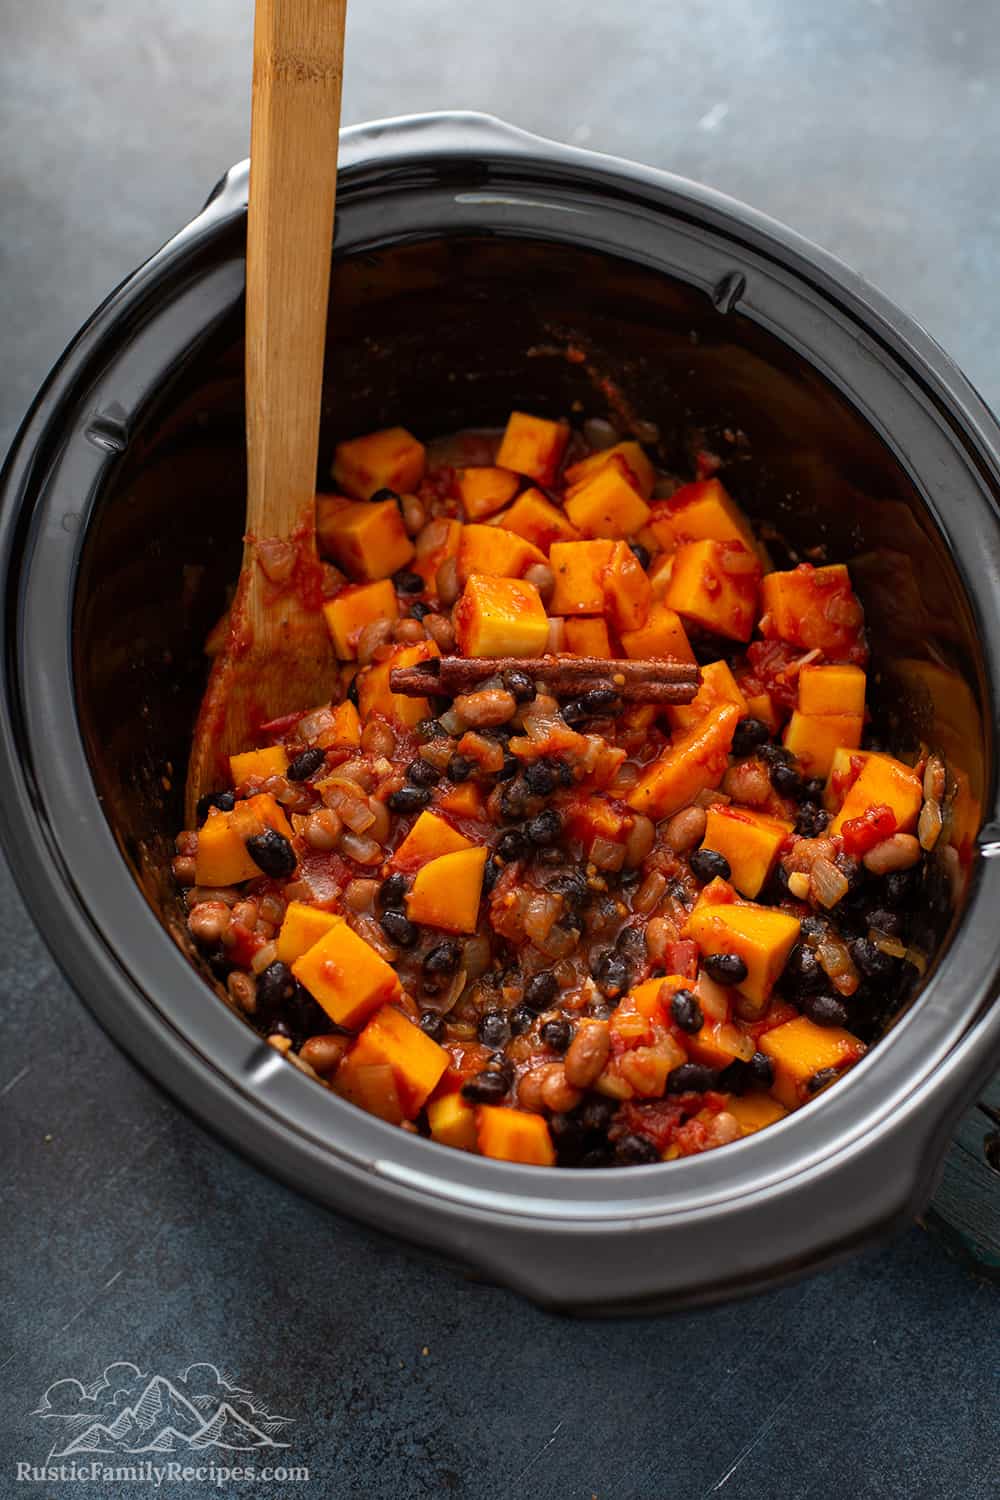 A slow cooker with diced butternut squash, beans and spices for vegetarian chili.